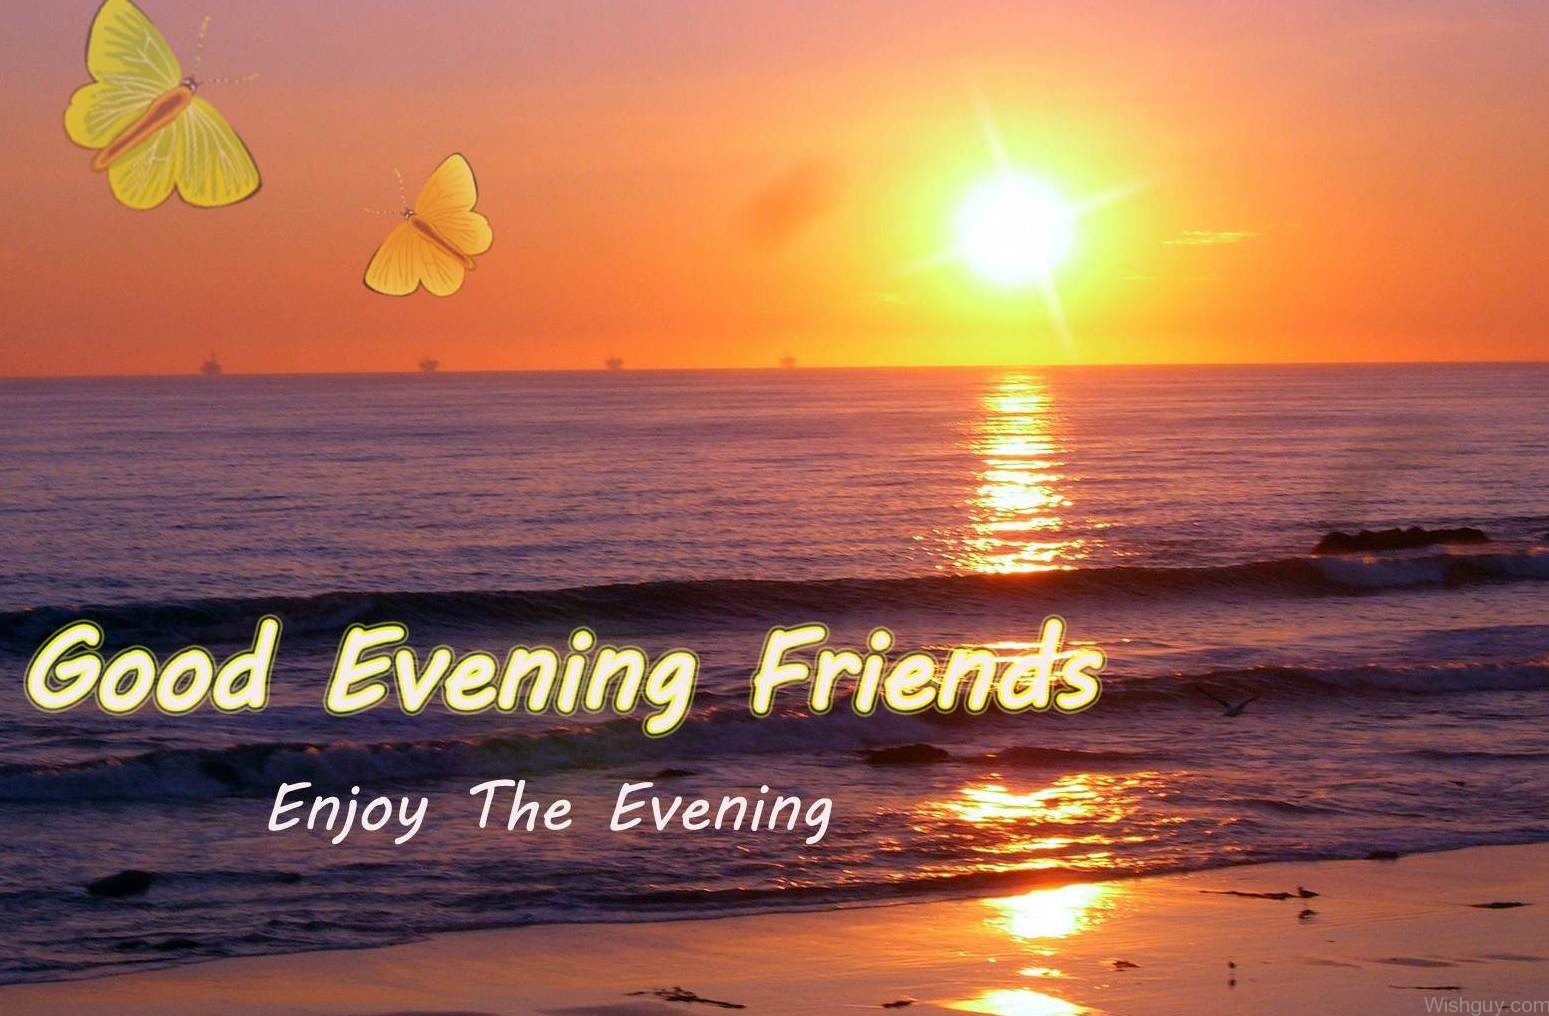 Good Evening Friends – Enjoy The Evening - Wishes, Greetings ...